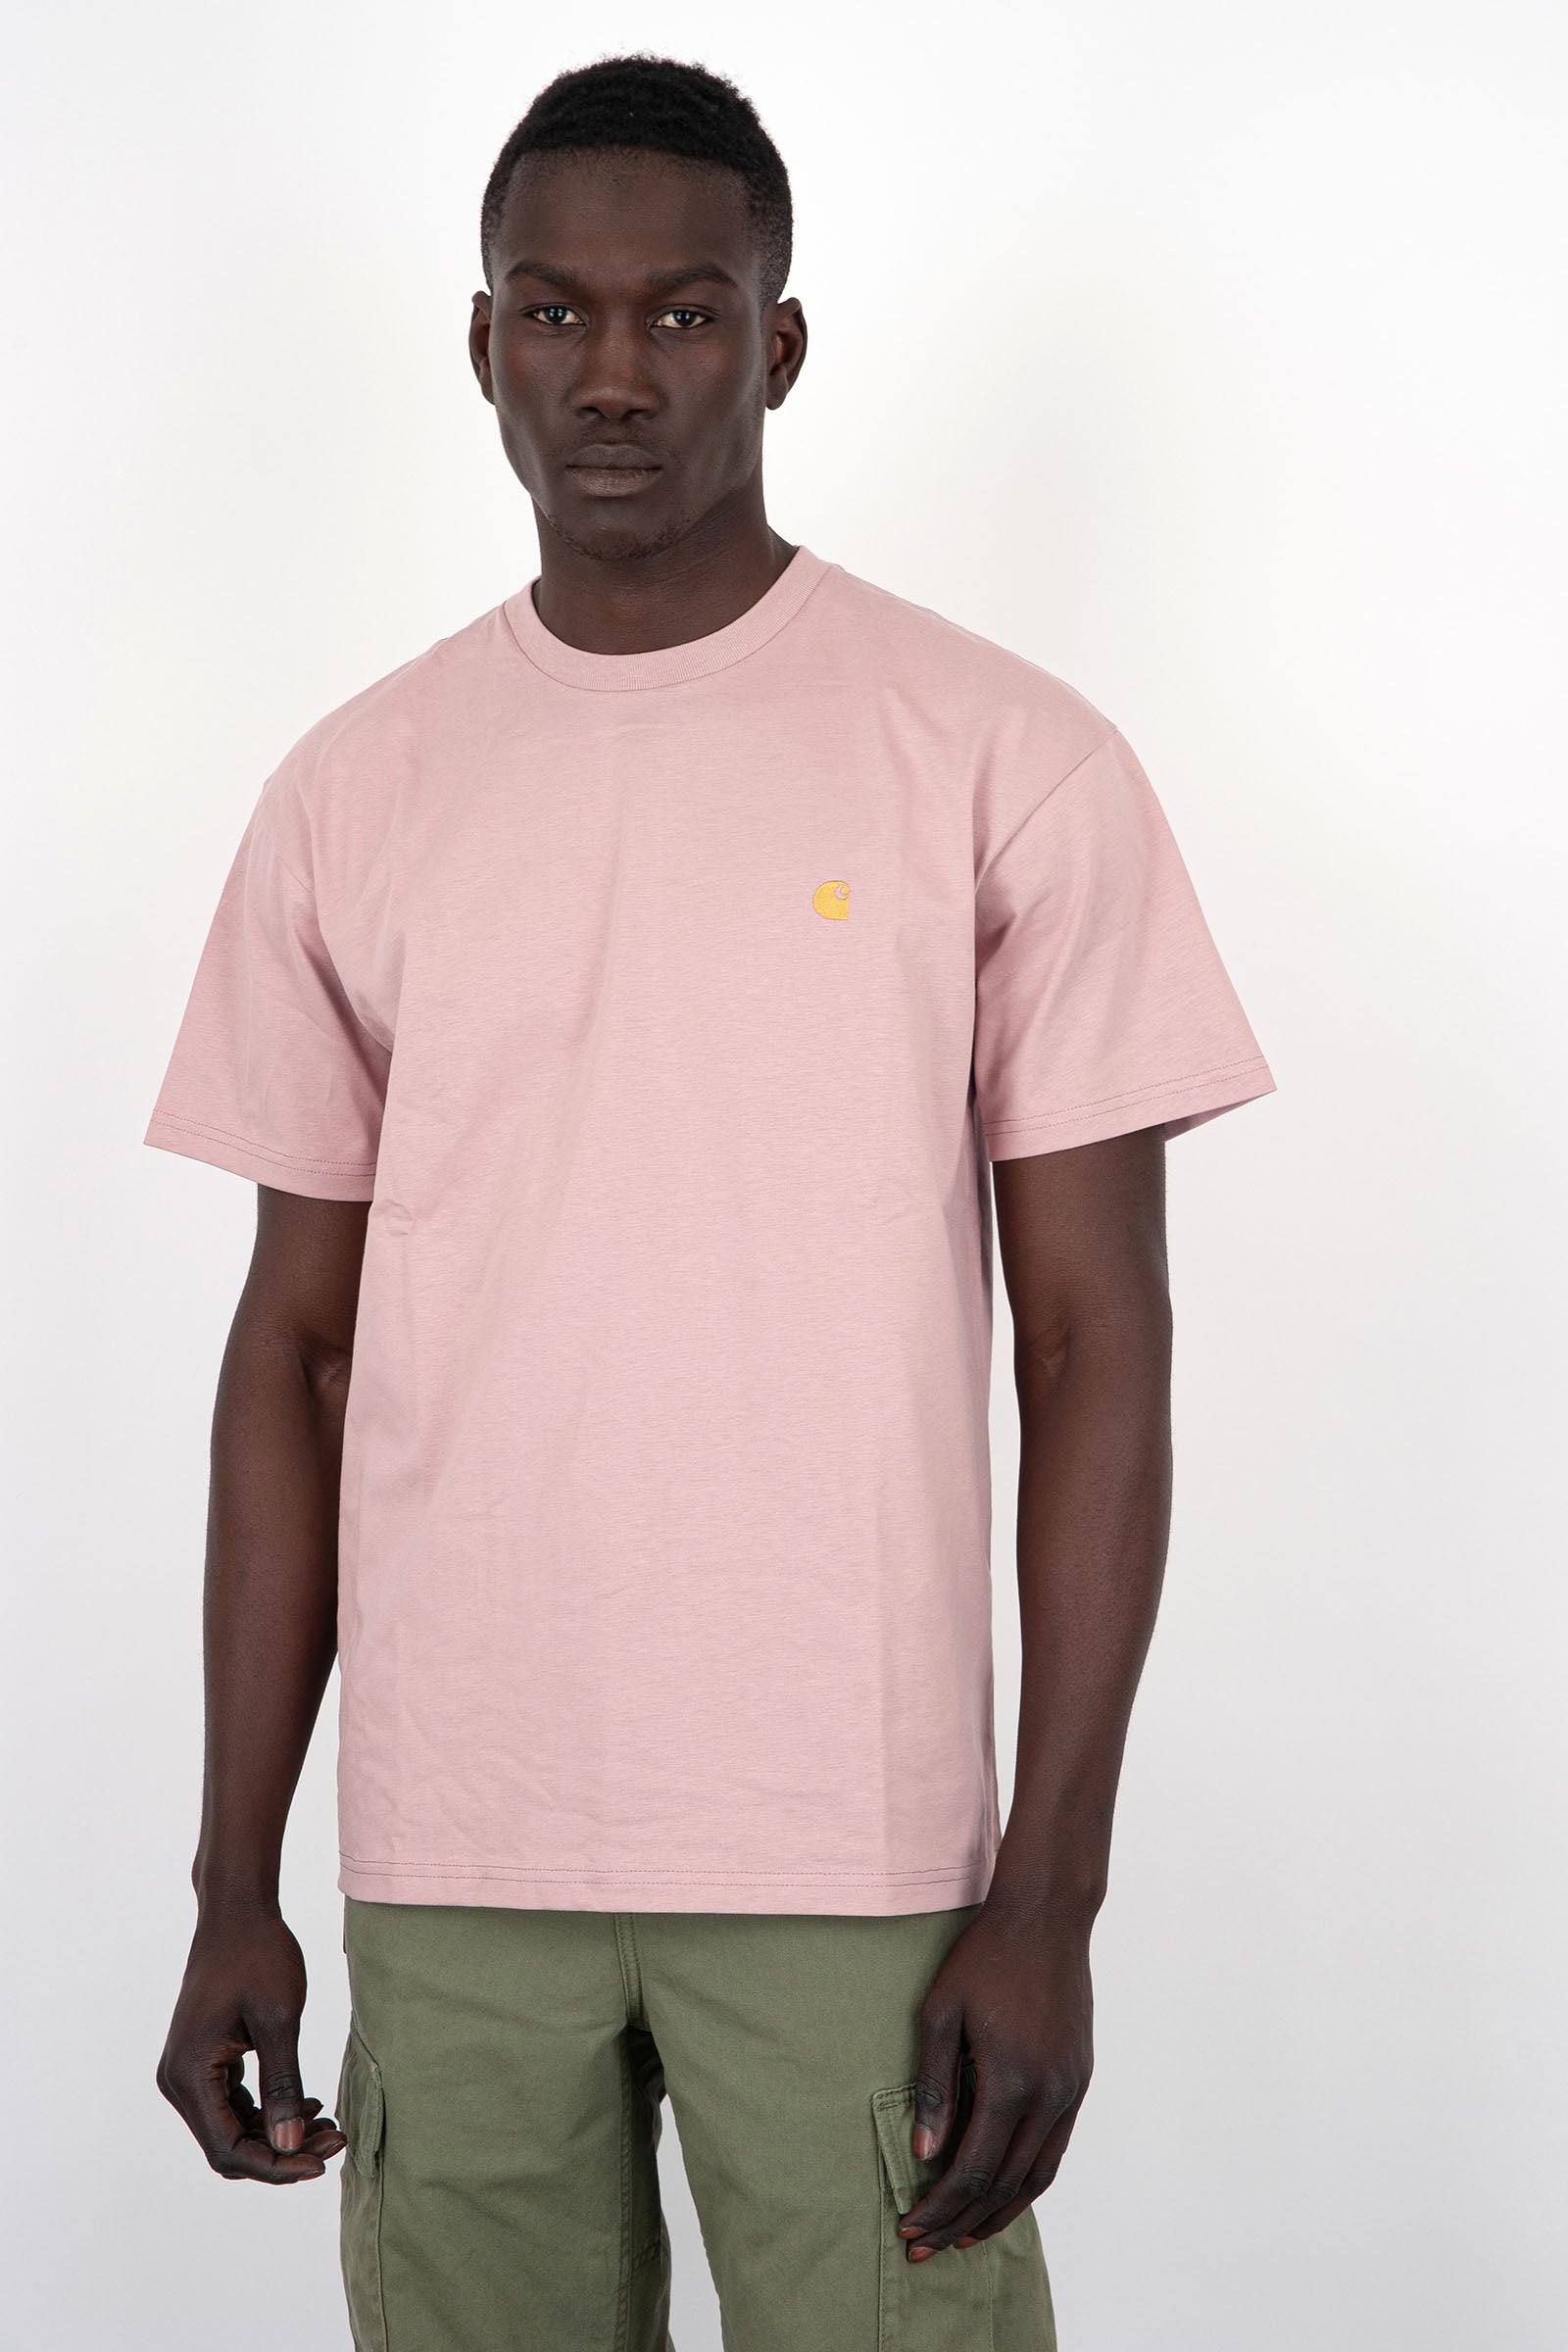 Carhartt WIP T-Shirt S/S Chase Cotton Pink - 5